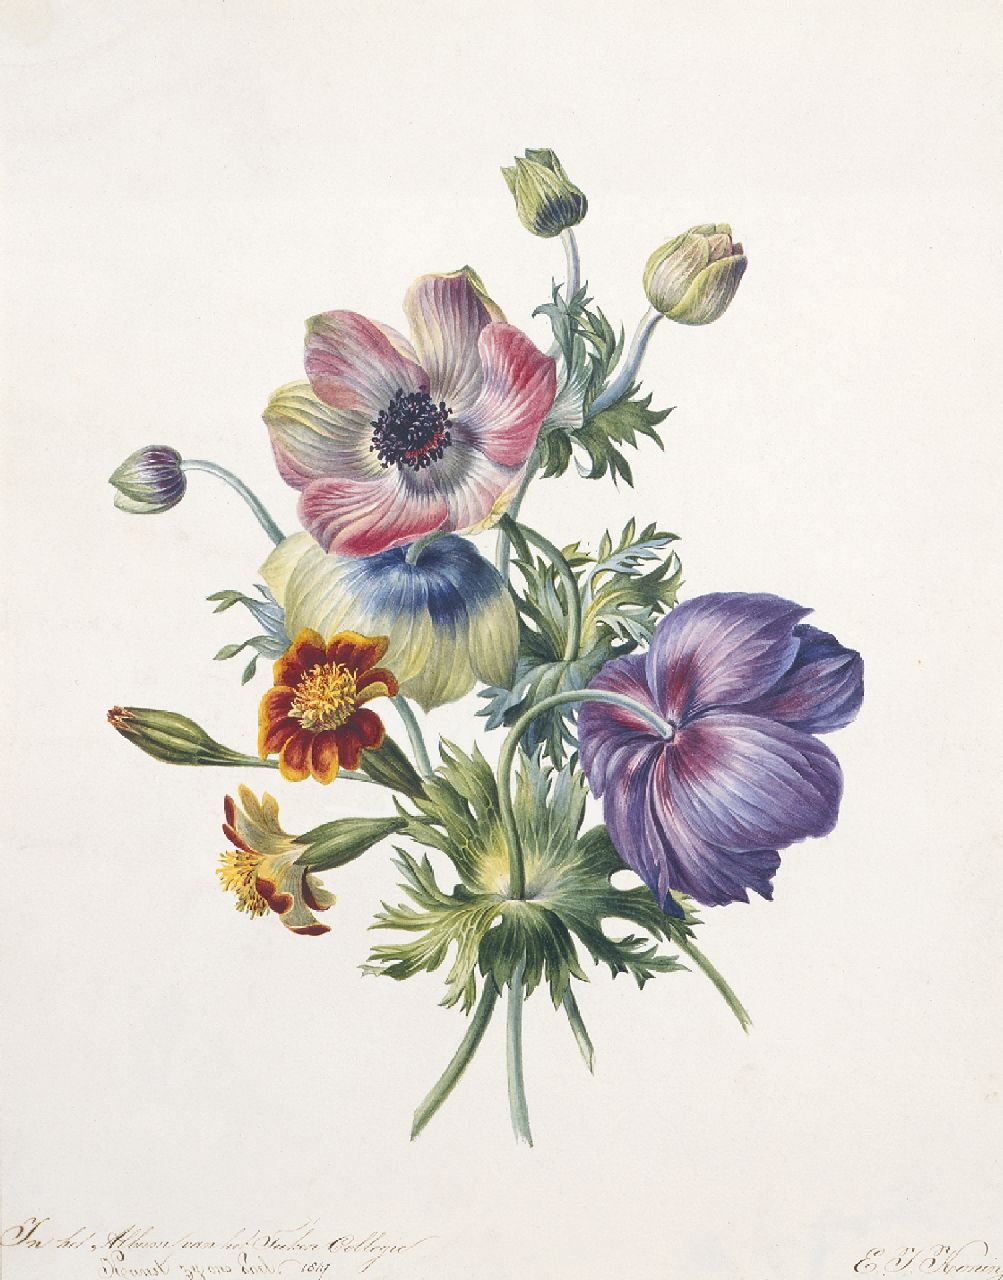 Koning E.J.  | Elisabeth Johanna Koning, A study of anemones, watercolour on paper 32.2 x 25.6 cm, signed l.r. and dated 1847